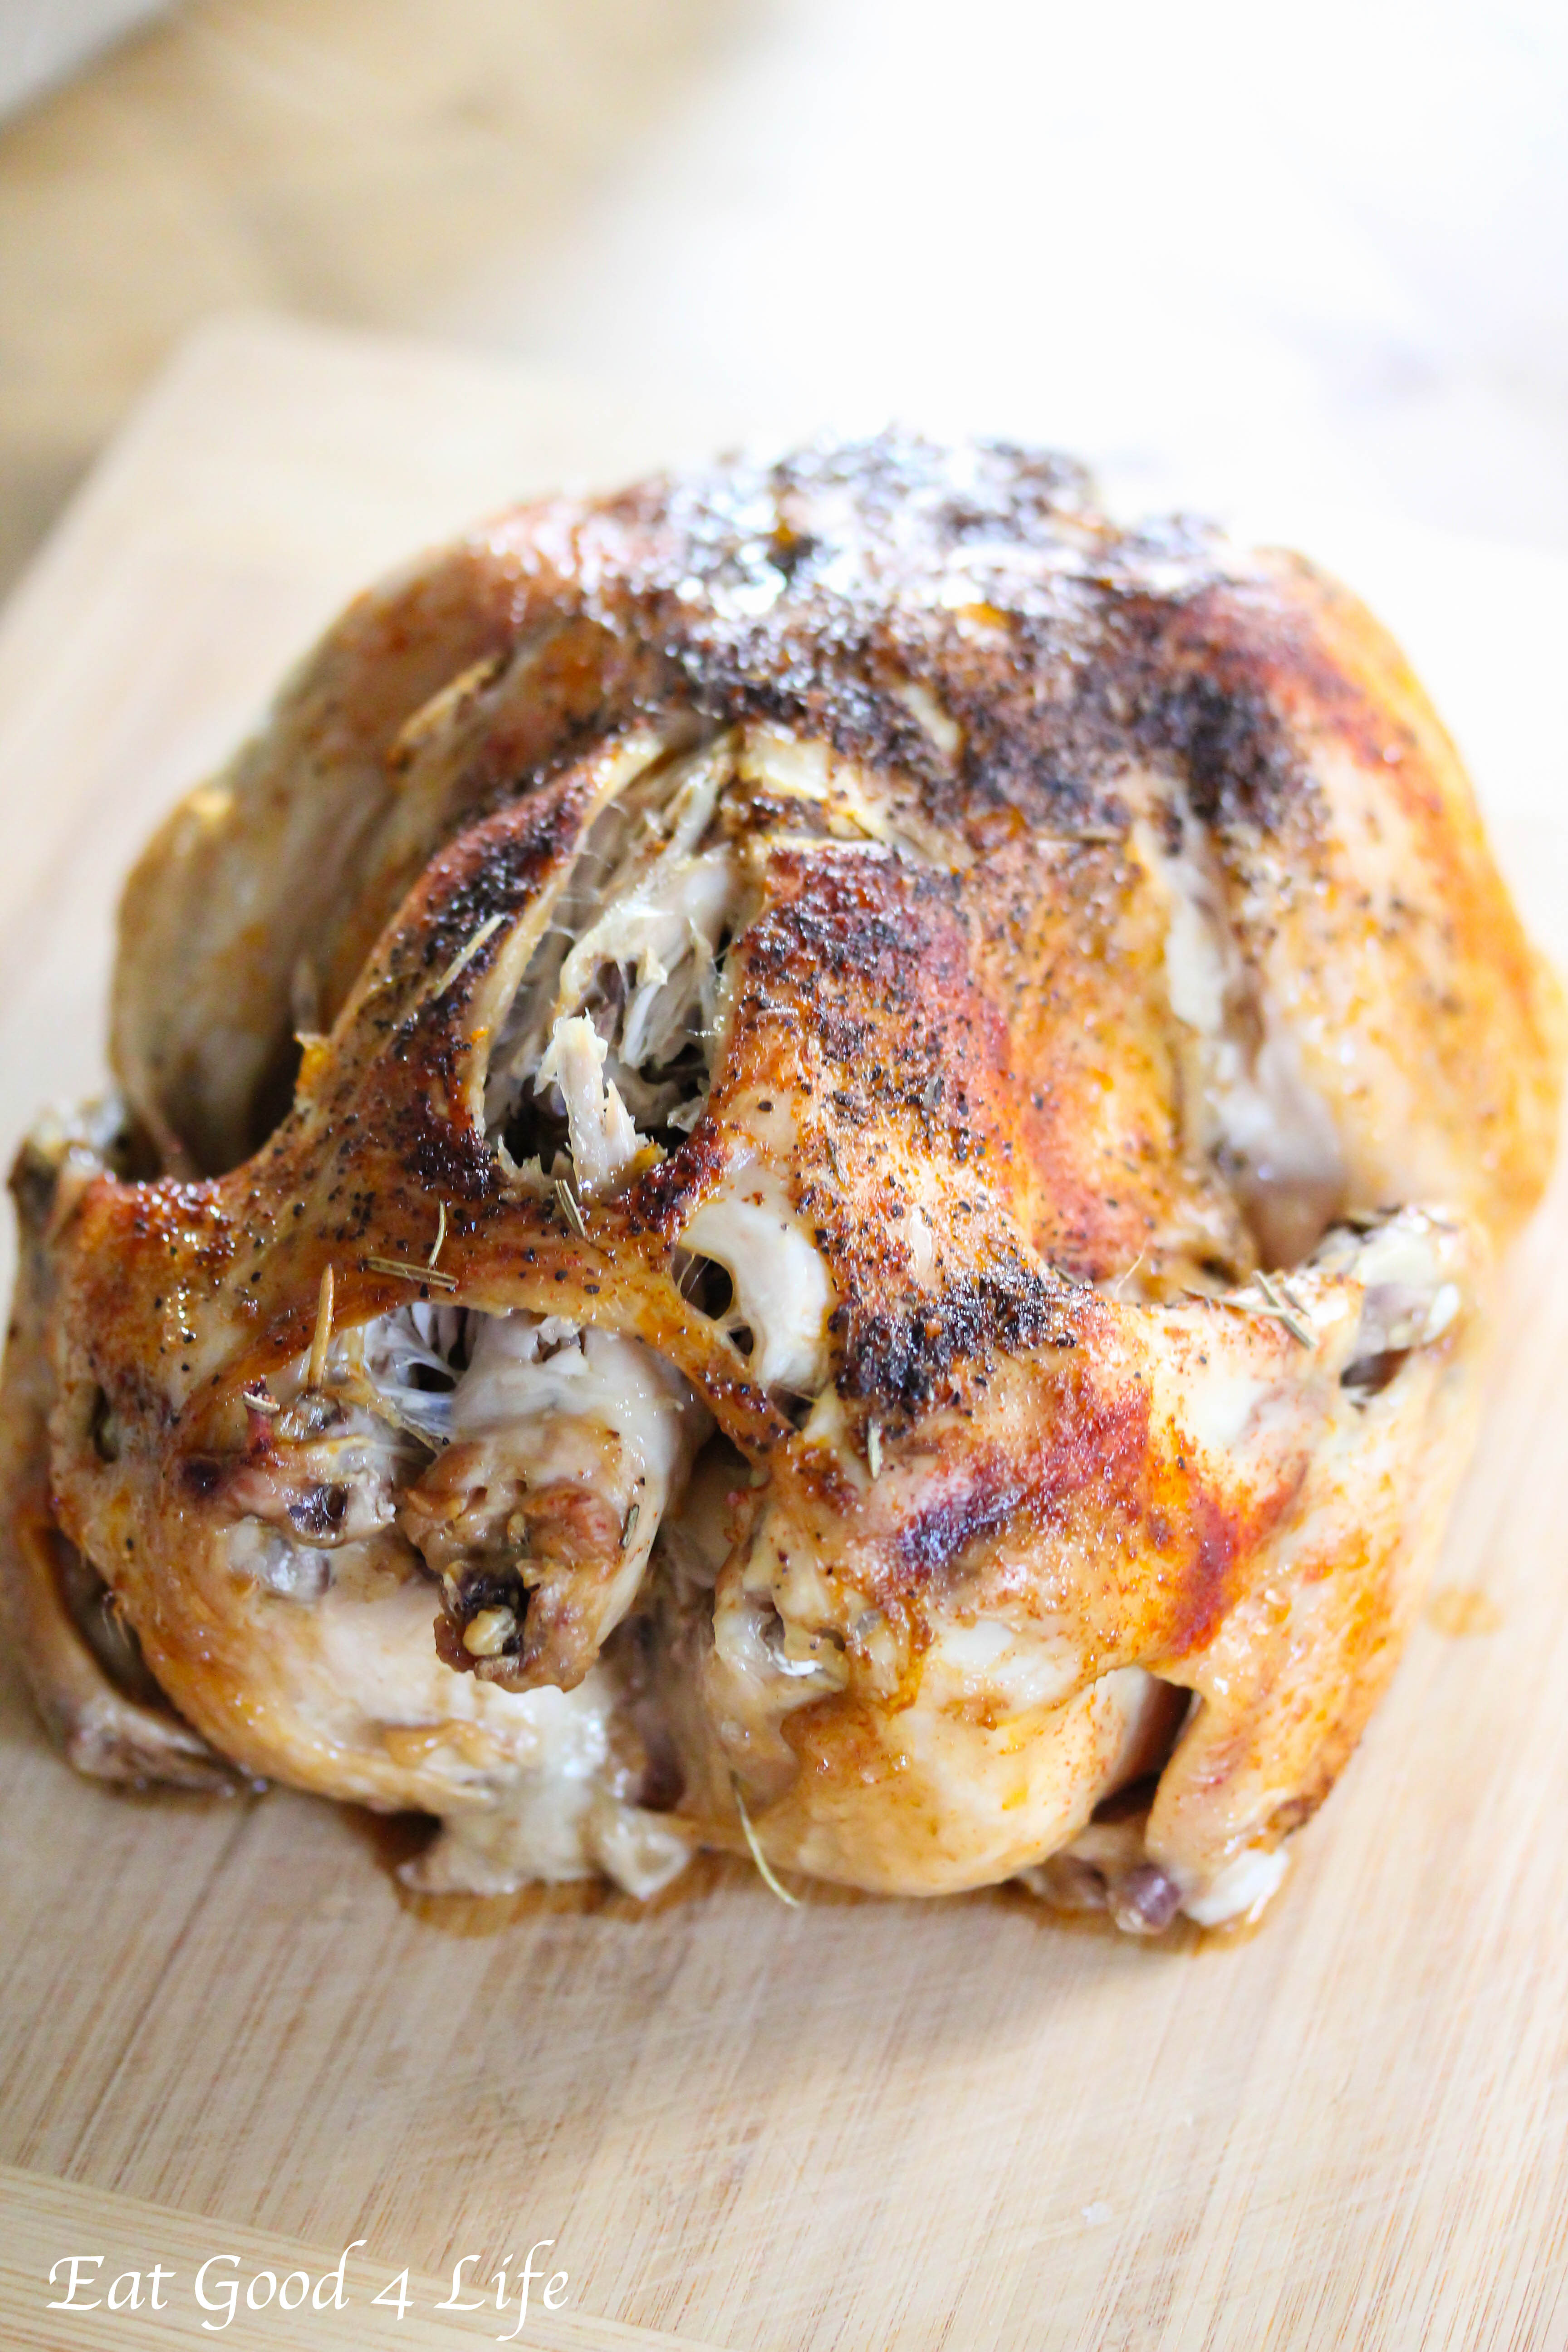 Slow Baked Chicken
 Slow cooker roasted chicken